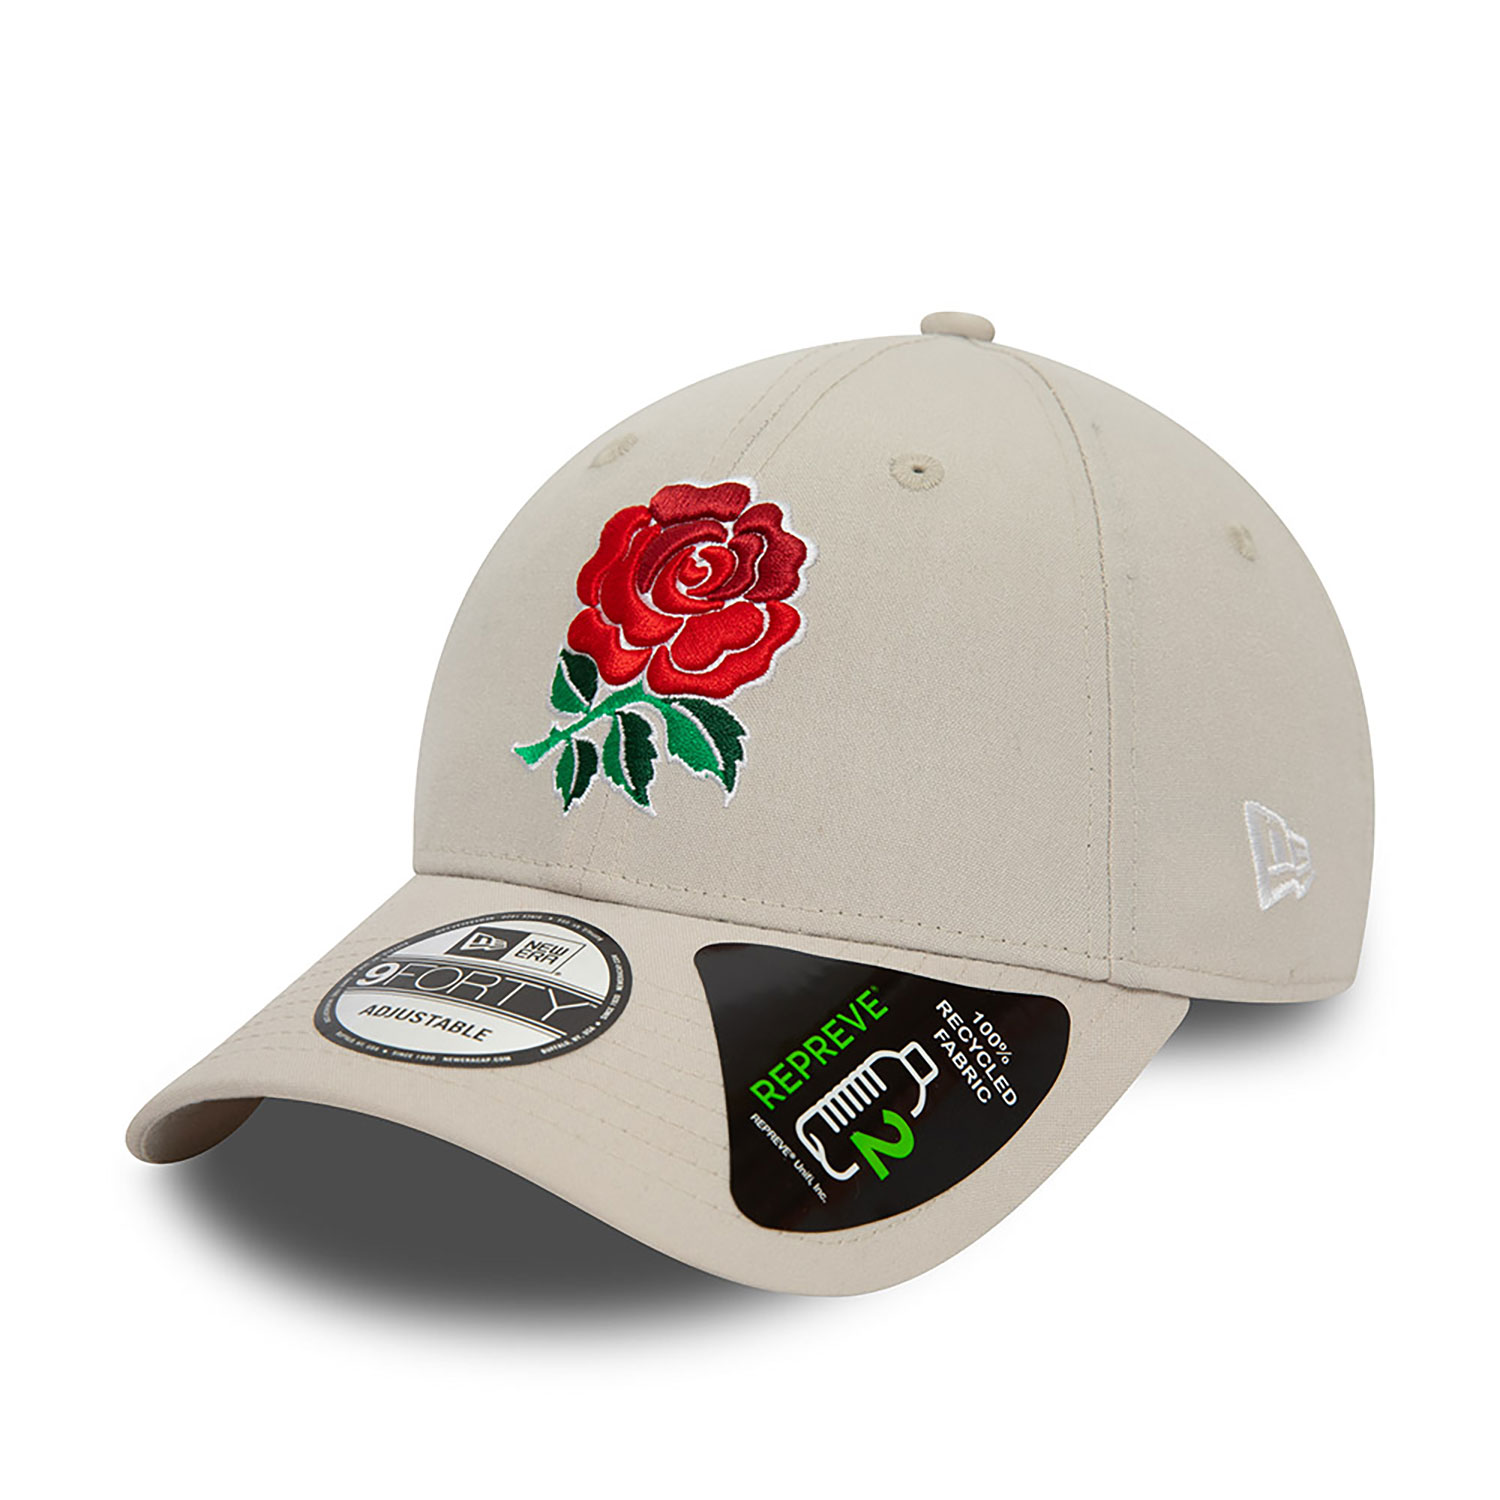 Rugby Football Union Repreve Stone 9FORTY Adjustable Cap